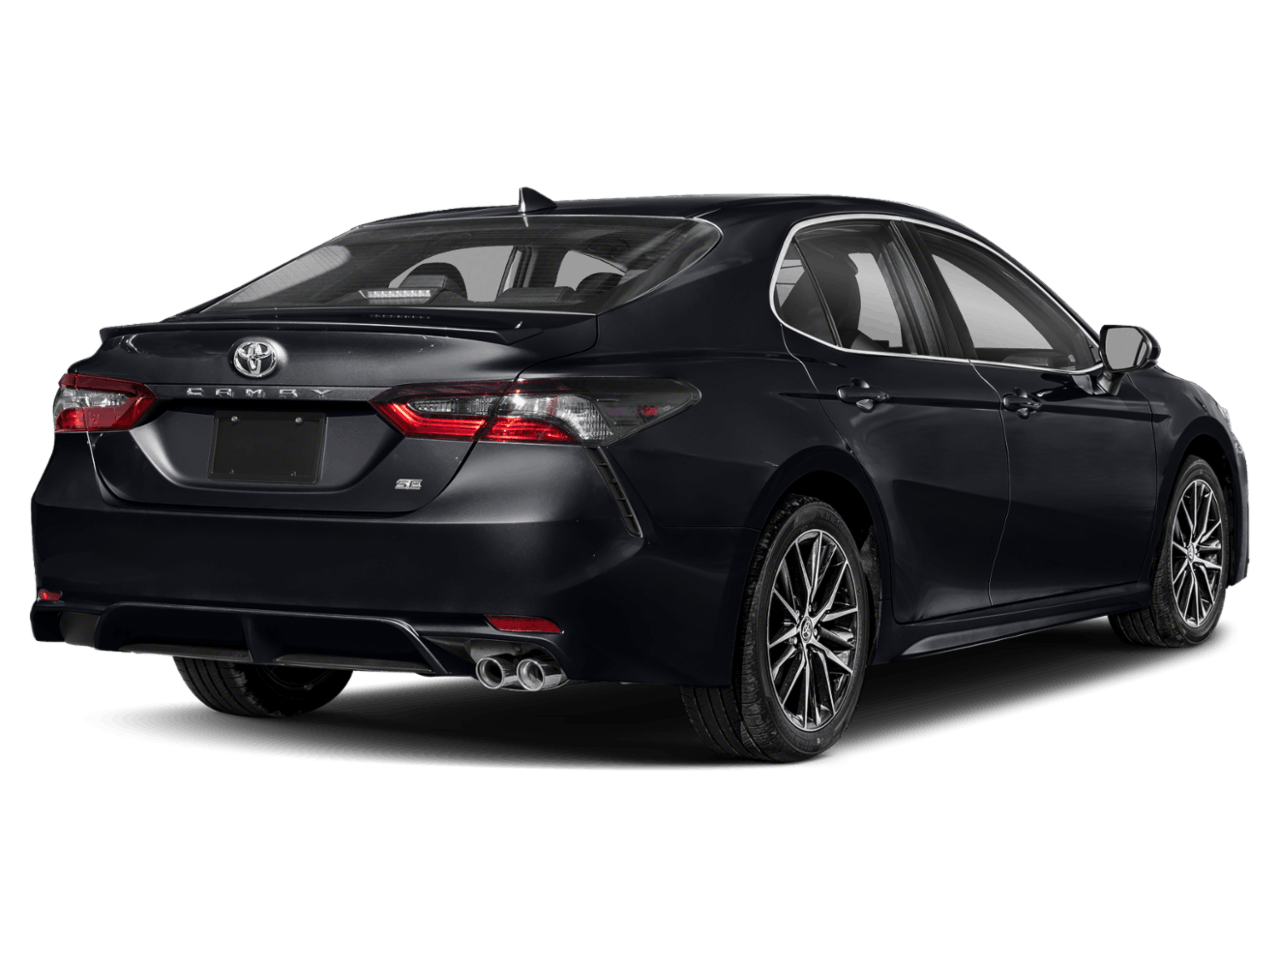 Used 2021 Toyota Camry Se In Prince Frederick Md 4t1g11ak1mu553686